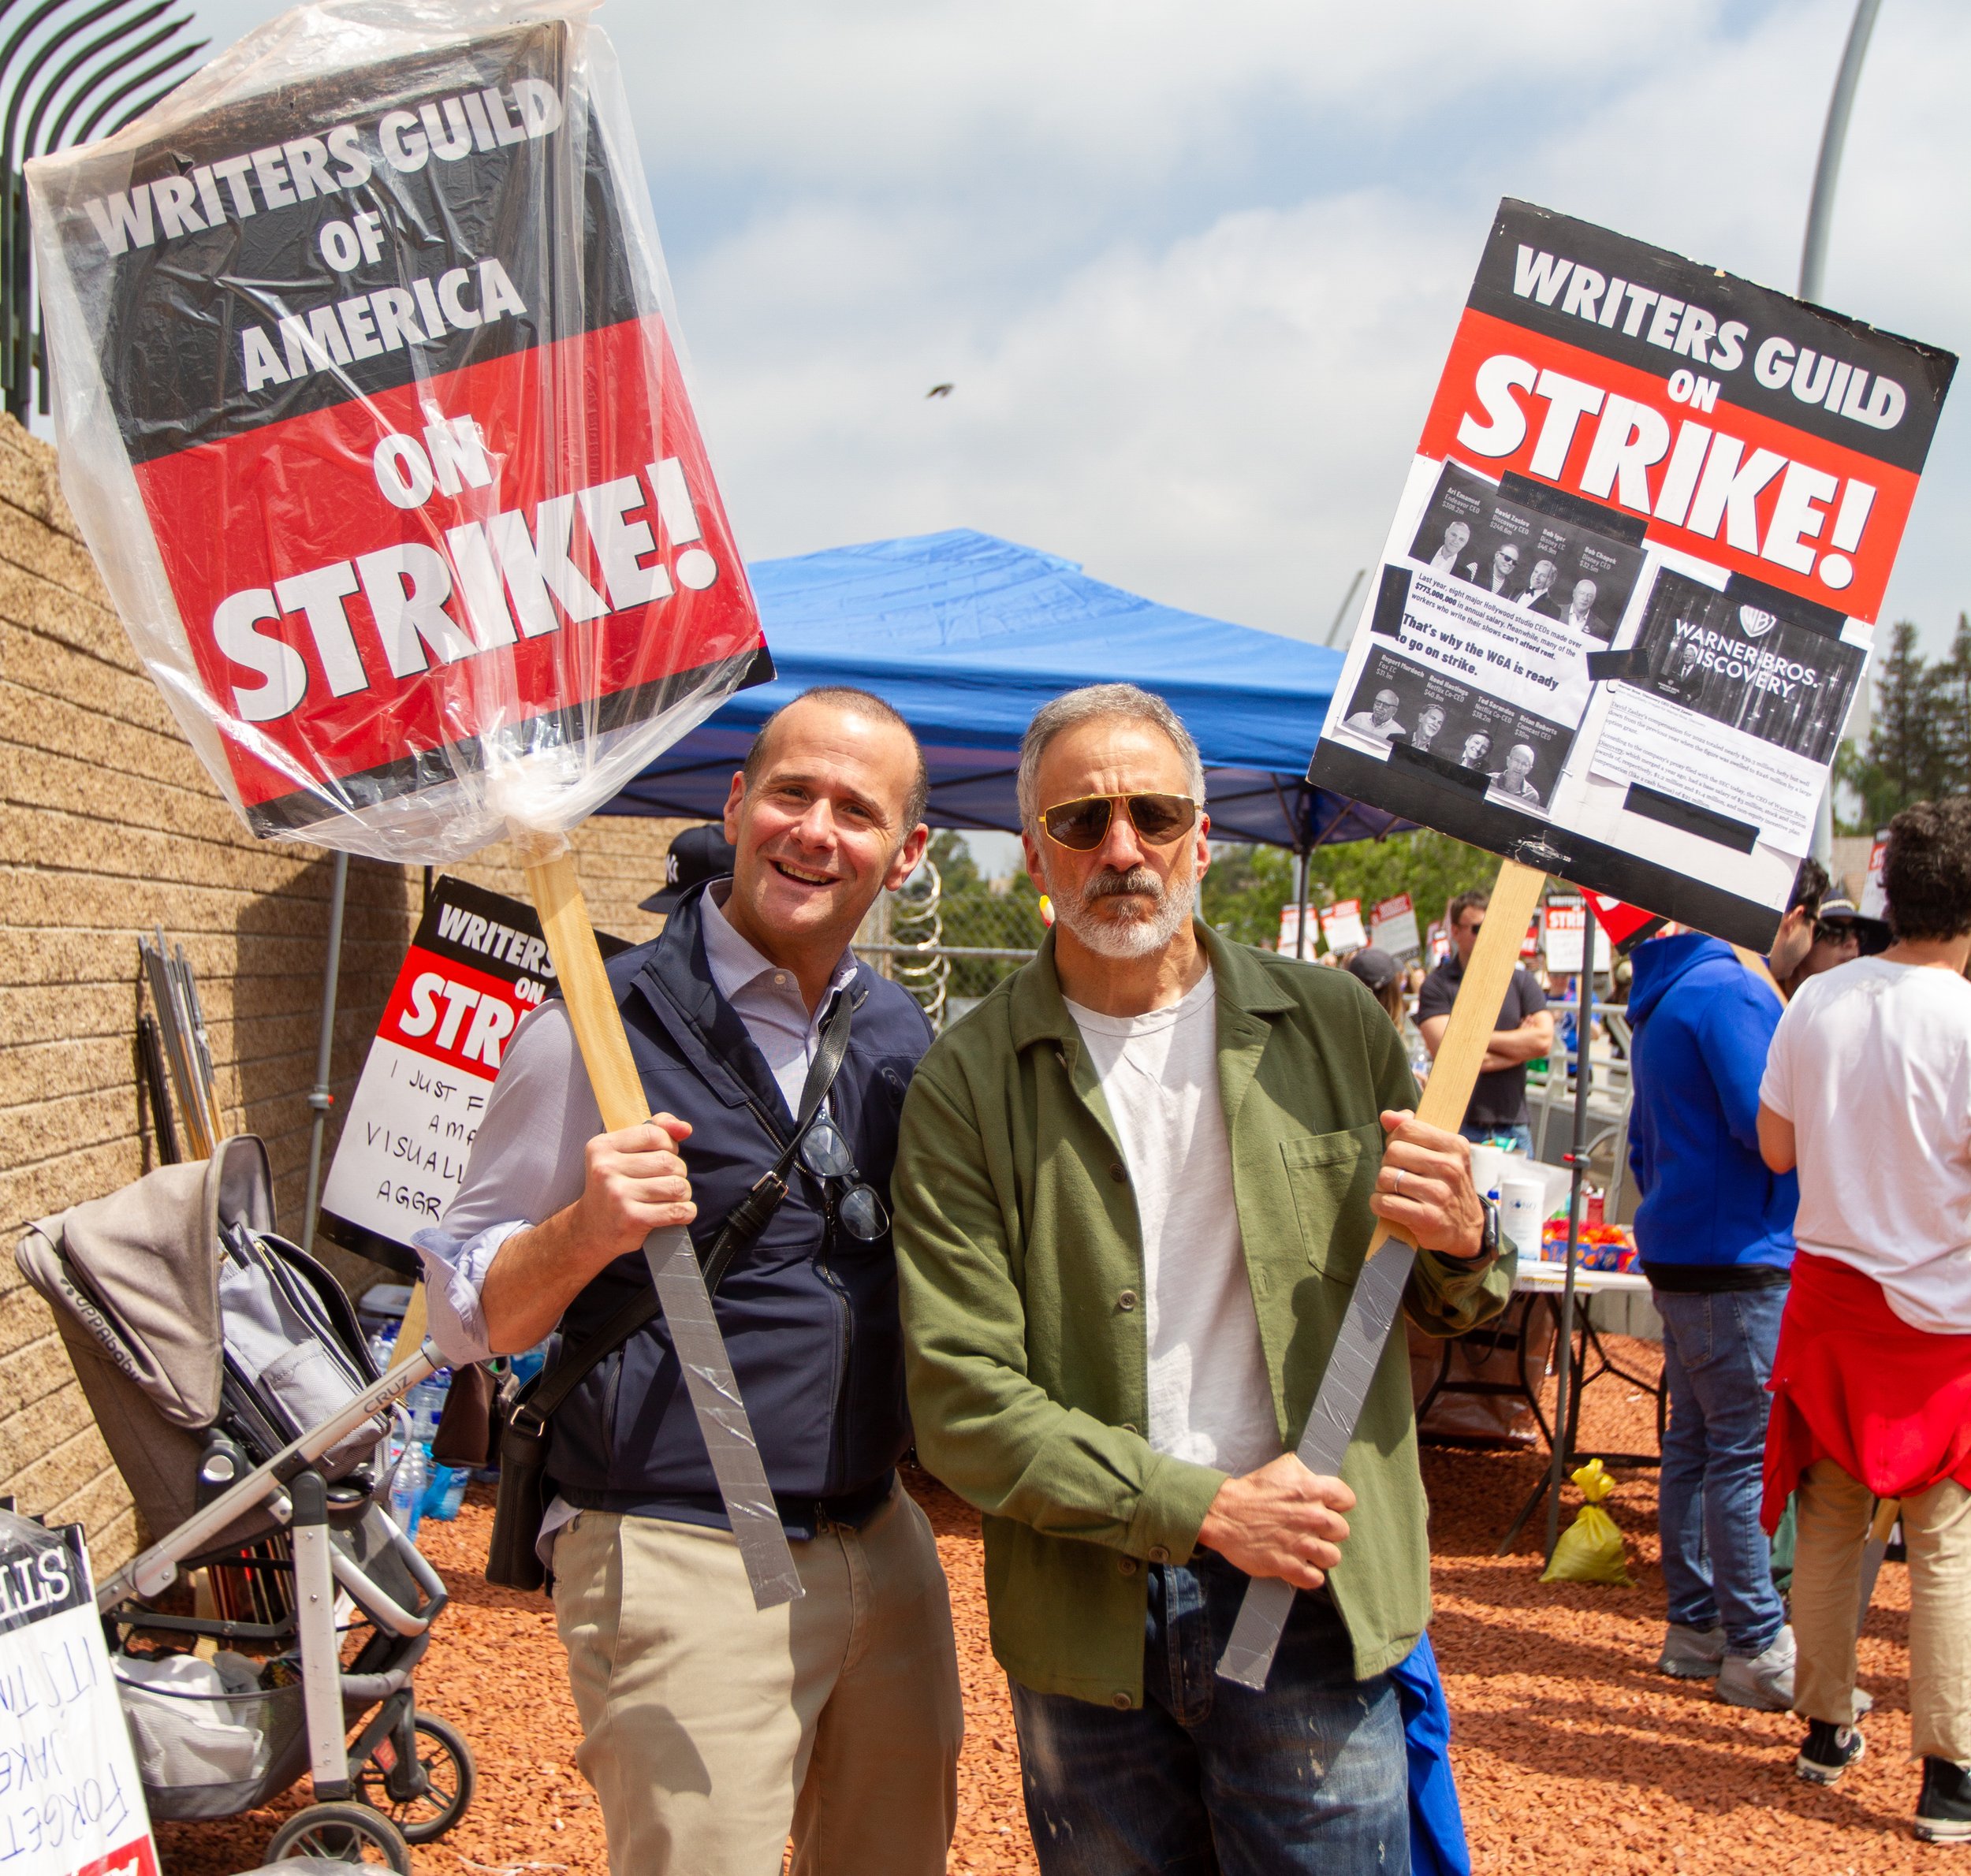  Creators of "Will & Grace" Max Mutchnick and David Kohan on strike at Radford Studio Center on Thursday, May 11, 2023 in Studio City, Calif. The strike began May 2 following failed negotations between the Writers Guild of America and the Alliance of